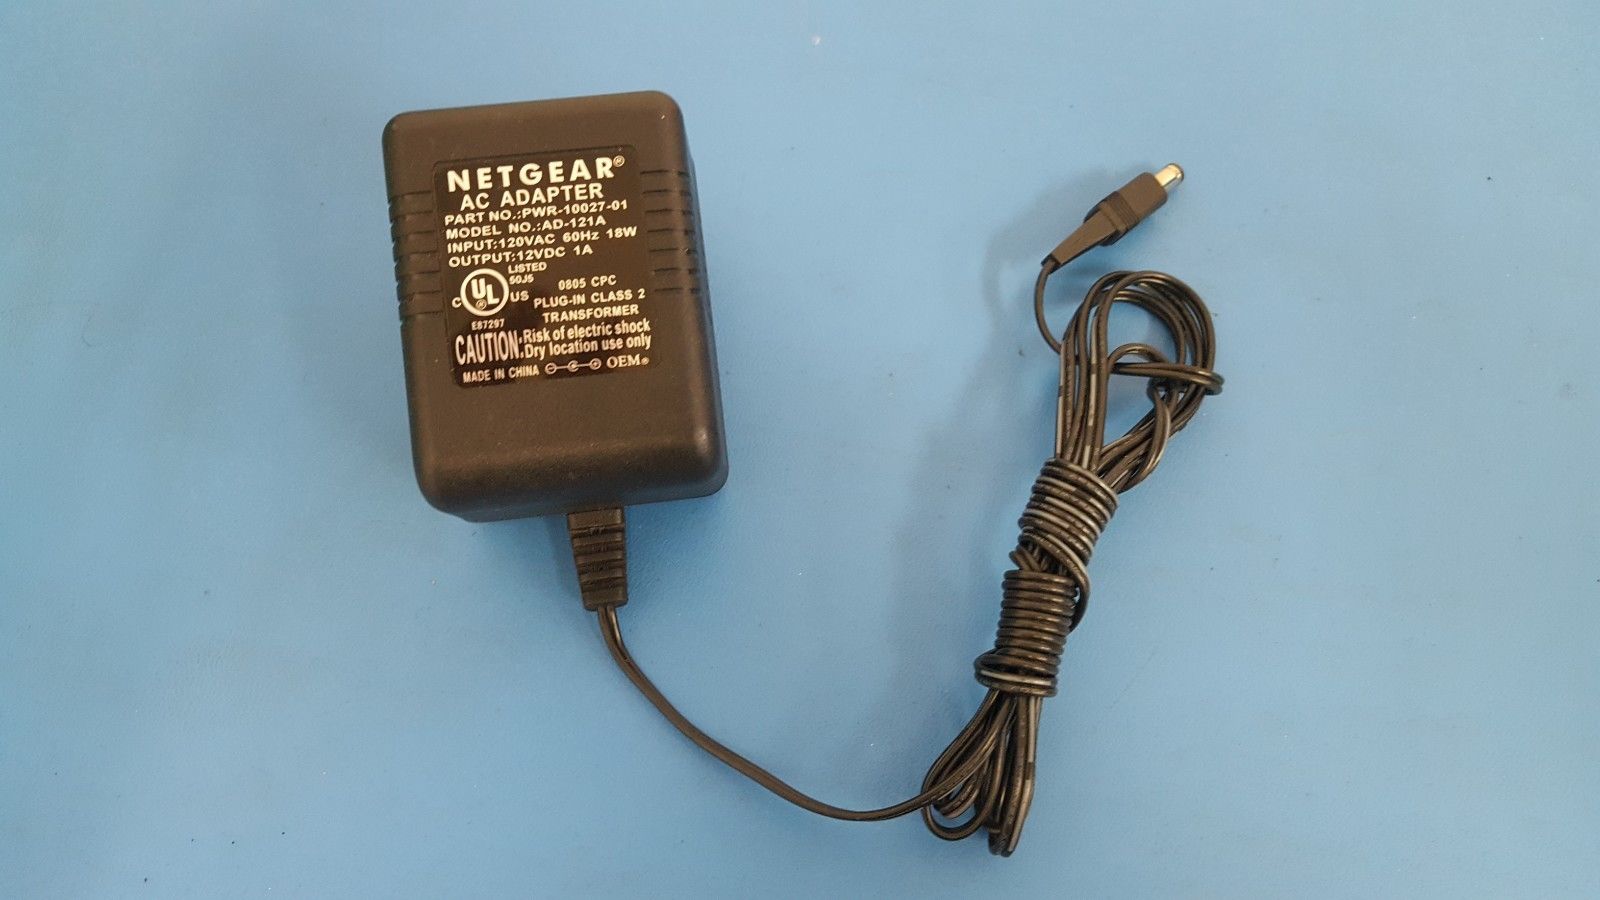 NEW NETGEAR PWR-10027-01 AD-121A1 12VDC 1A AC ADAPTER power supply